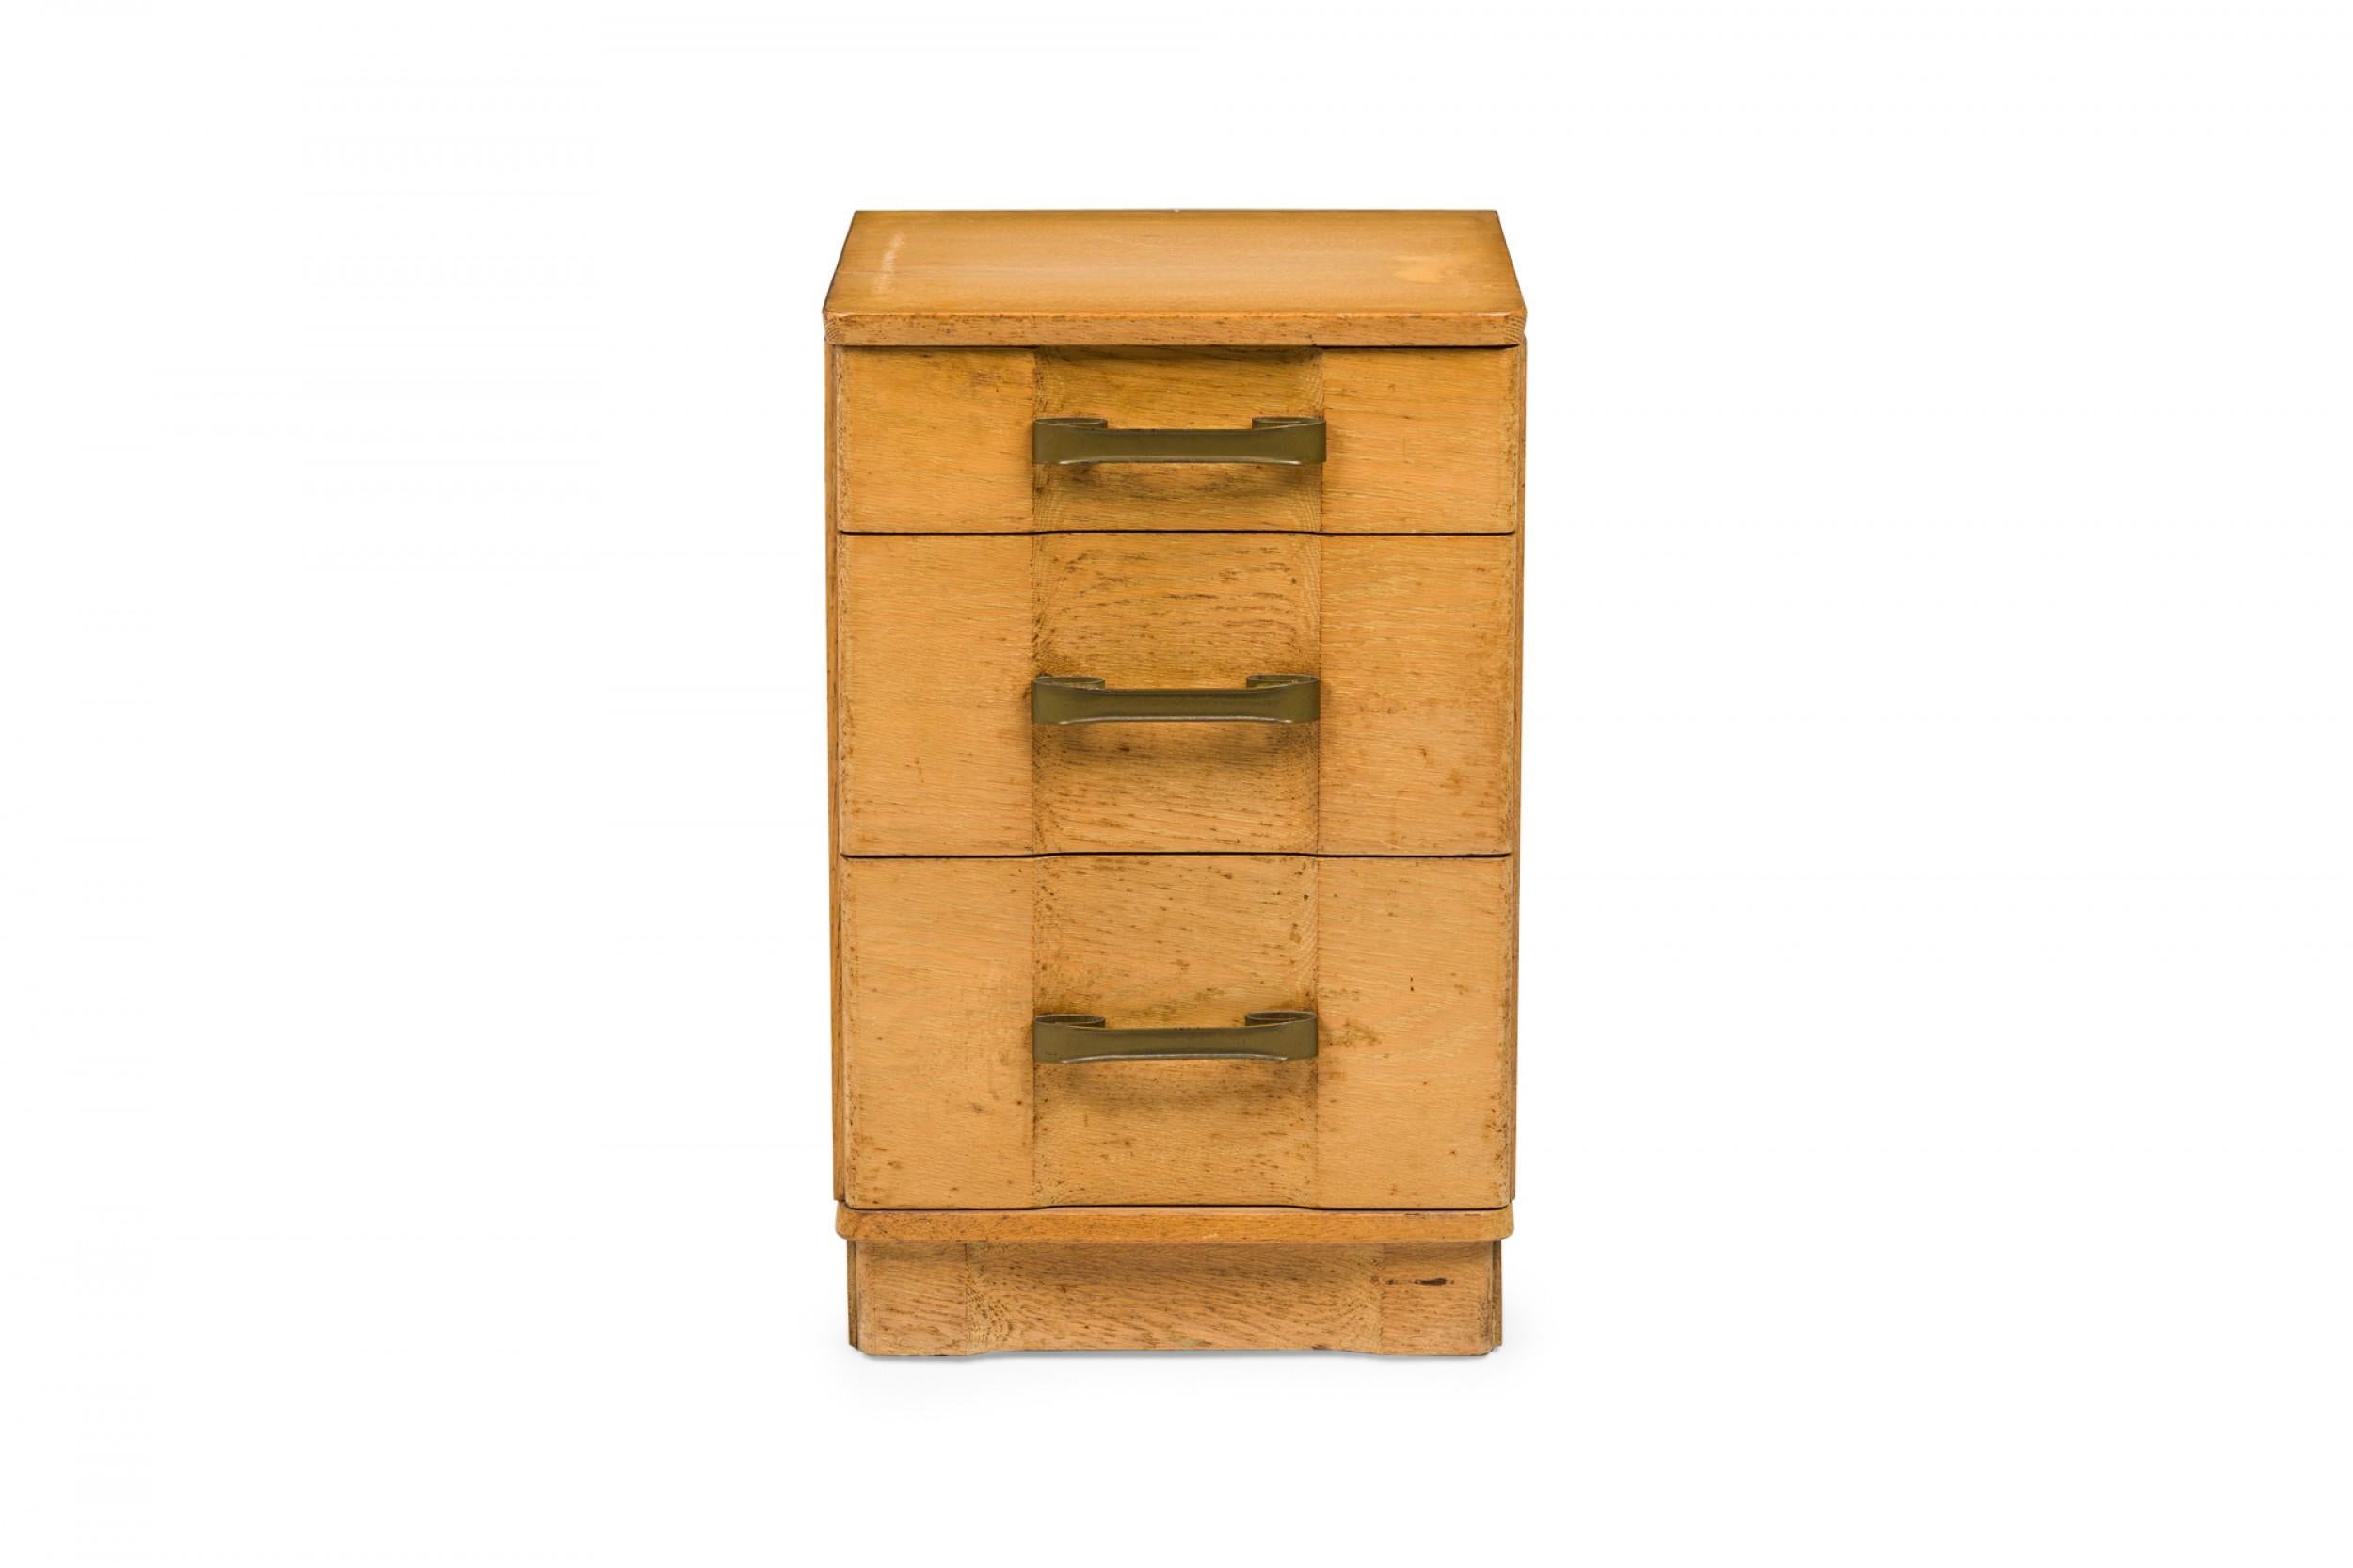 American Mid-Century bedside table / nightstand containing three drawers with recessed center fronts and scroll design brass drawer pulls in a light wooden cabinet with rounded corners and a pedestal base. (MORGAN FURNITURE COMPANY).
 